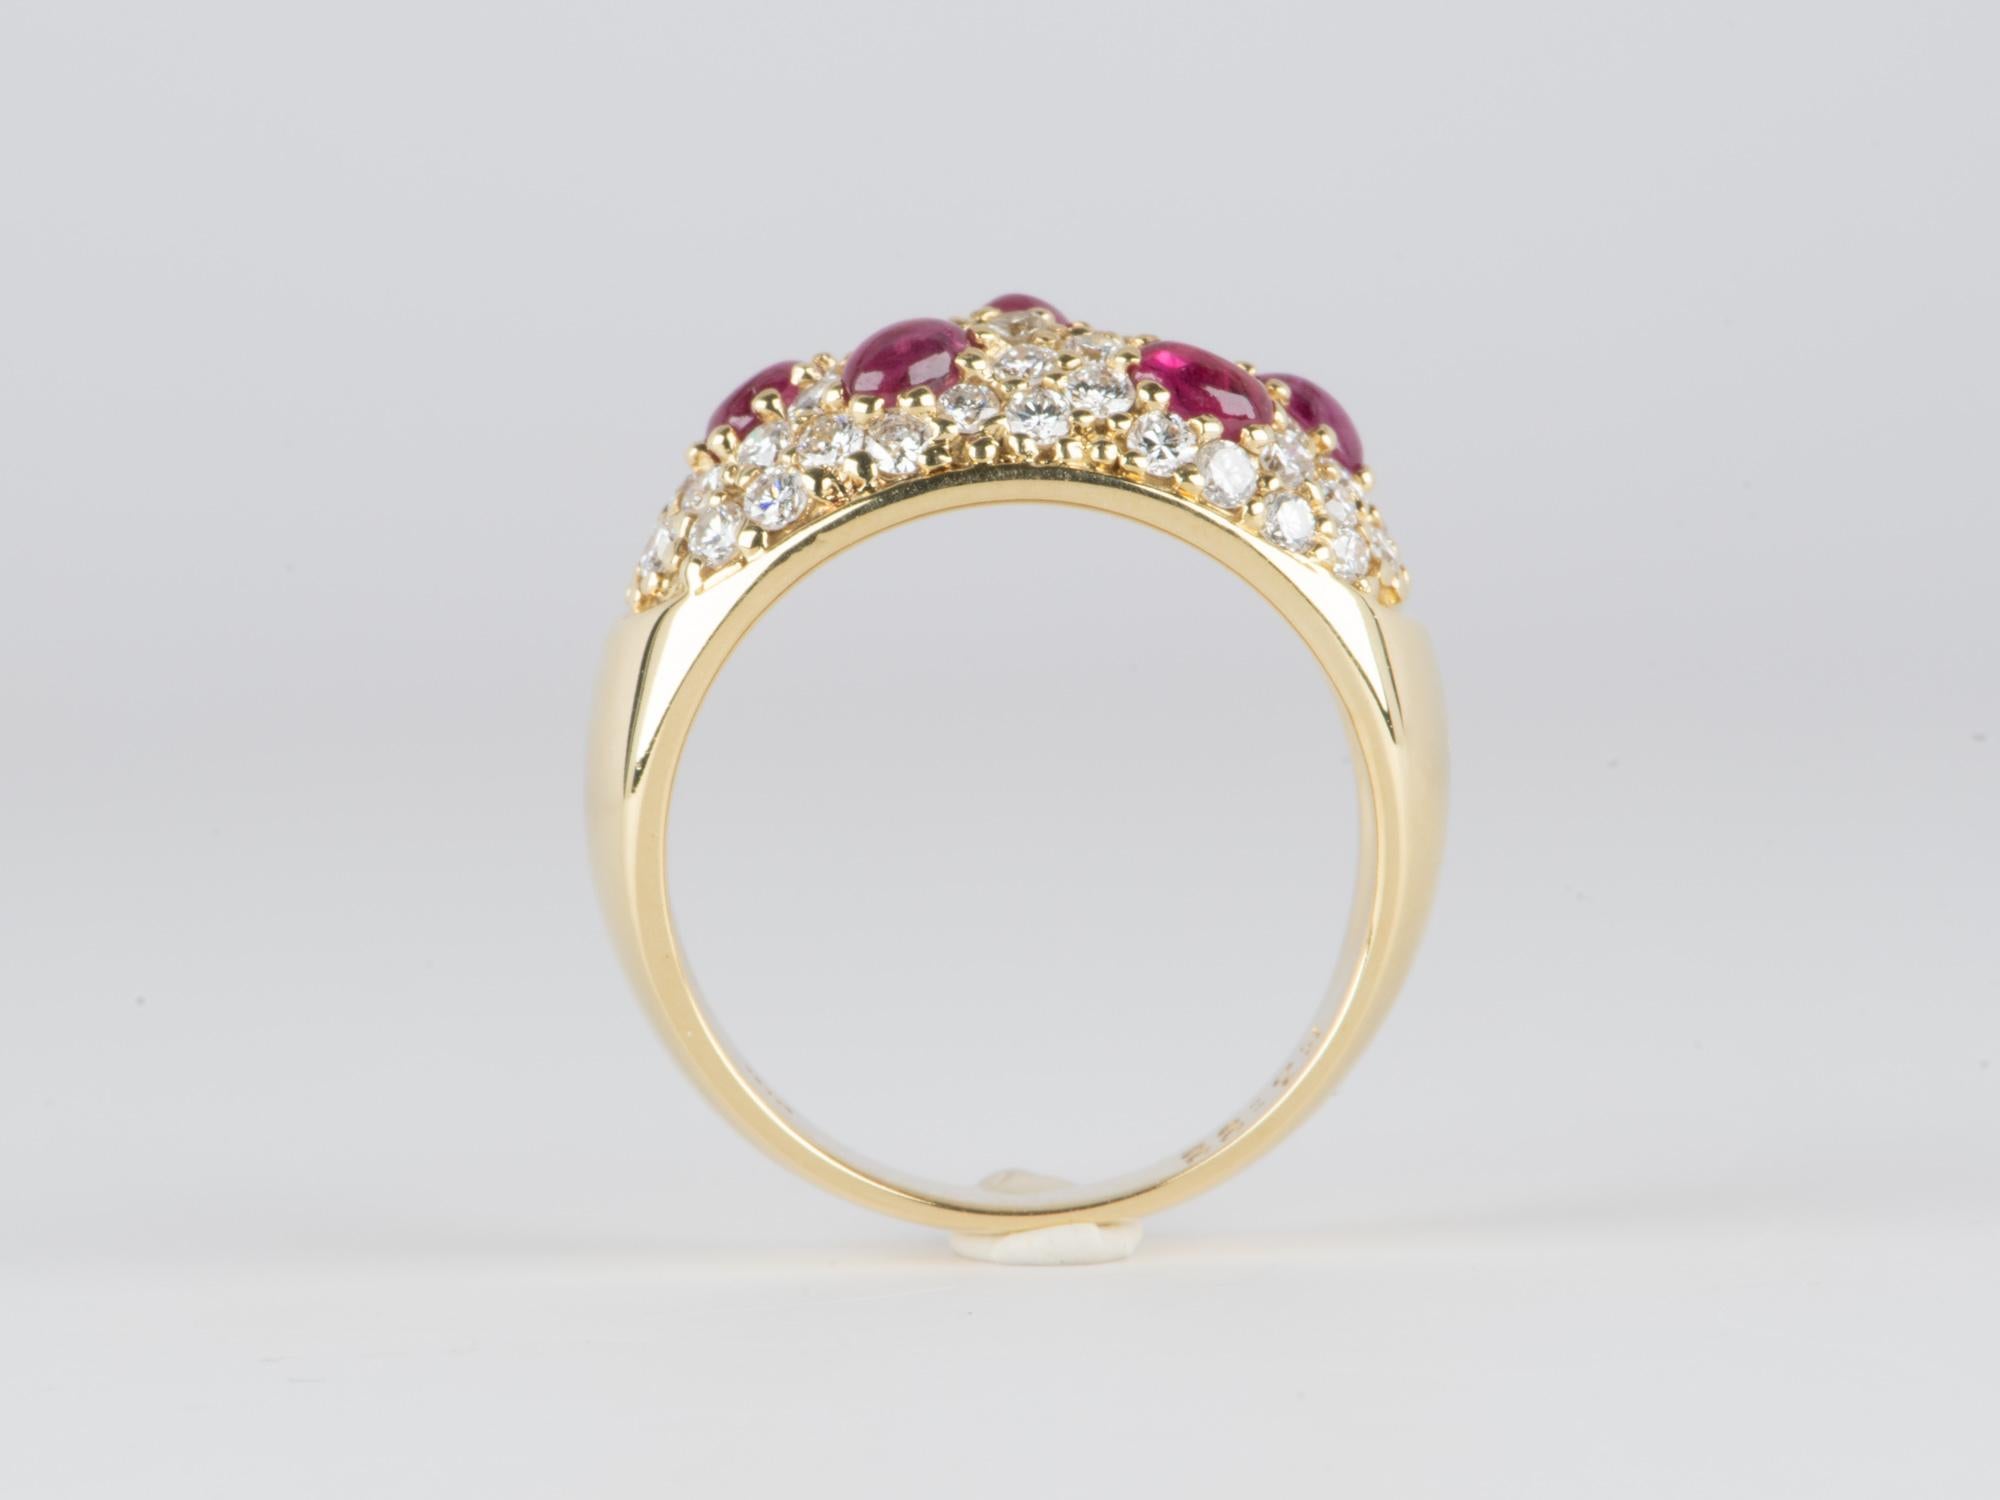 Wide Dome Band with Pave Diamond and Cabochon Ruby 18K Gold 6.6g V1117 In New Condition For Sale In Osprey, FL